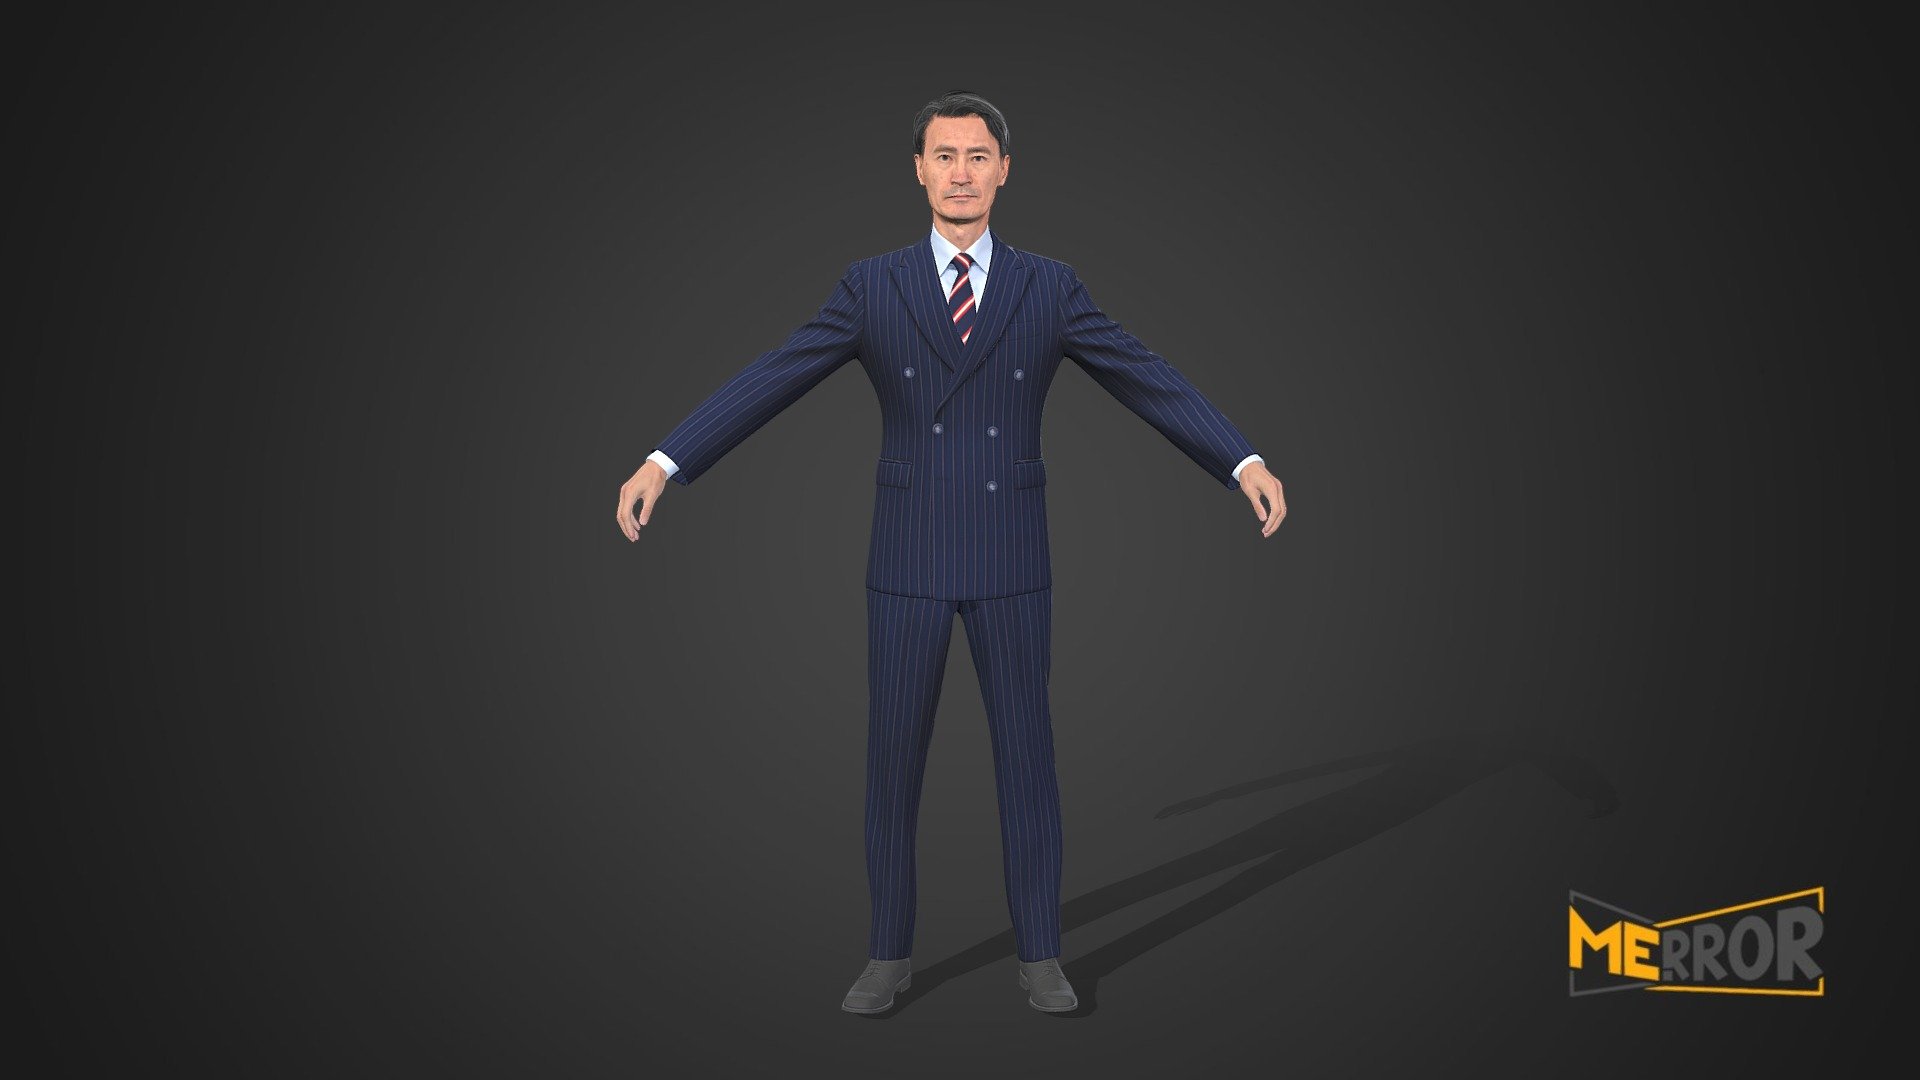 ME.RROR


From 3D models of Asian individuals to a fresh selection of free assets available each month - explore a richer diversity of photorealistic 3D assets at the ME.RROR asset store!

https://me-rror.com/store




[Model Info]




Model Formats : FBX, MAX

Texture Maps (8K) : Diffuse, Normal

Texture Maps (4K) : Hair Diffuse, Alpha

If you encounter any problems using this model, please feel free to contact us. We'd be glad to help you.



[About ME.RROR]

Step into the future with ME.RROR, South Korea's leading 3D specialist. Bespoke creations are not just possible; they are our specialty.

Service areas:




3D scanning

3D modeling

Virtual human creation

Inquiries: https://merror.channel.io/lounge - [Game-ready] Asian Man Scan A-Posed 3 - Buy Royalty Free 3D model by ME.RROR Studio (@merror) 3d model